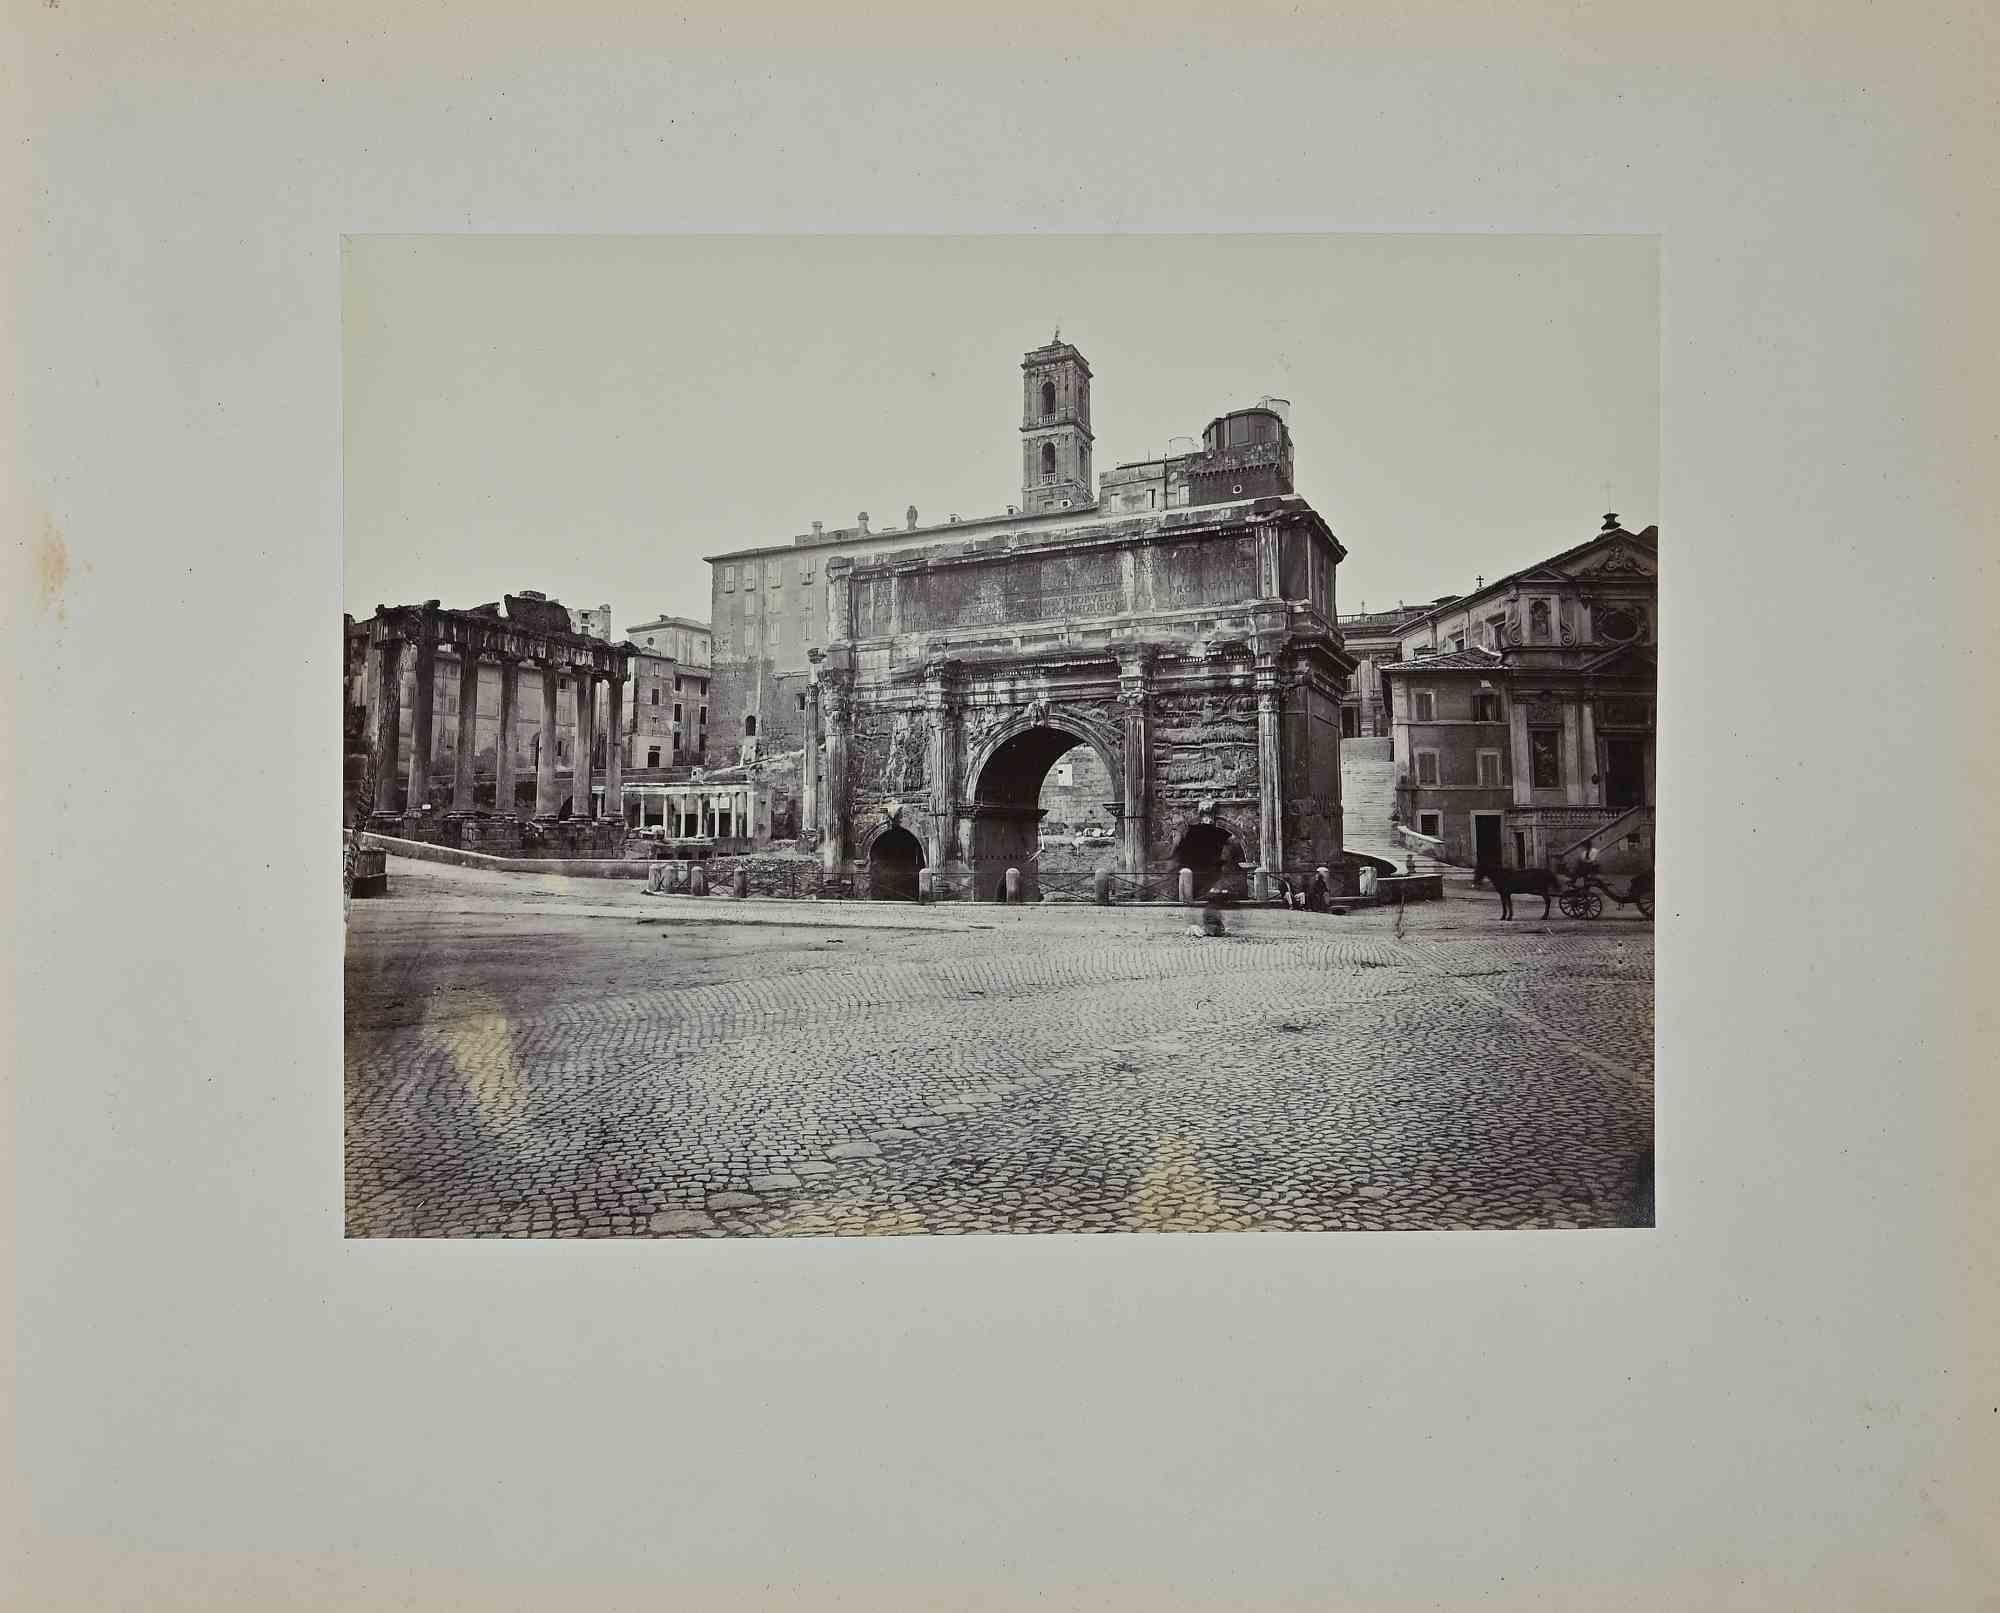 Francesco Sidoli Landscape Photograph - View of Ancient Rome - Photograph by F. Sidoli - Late 19th Century